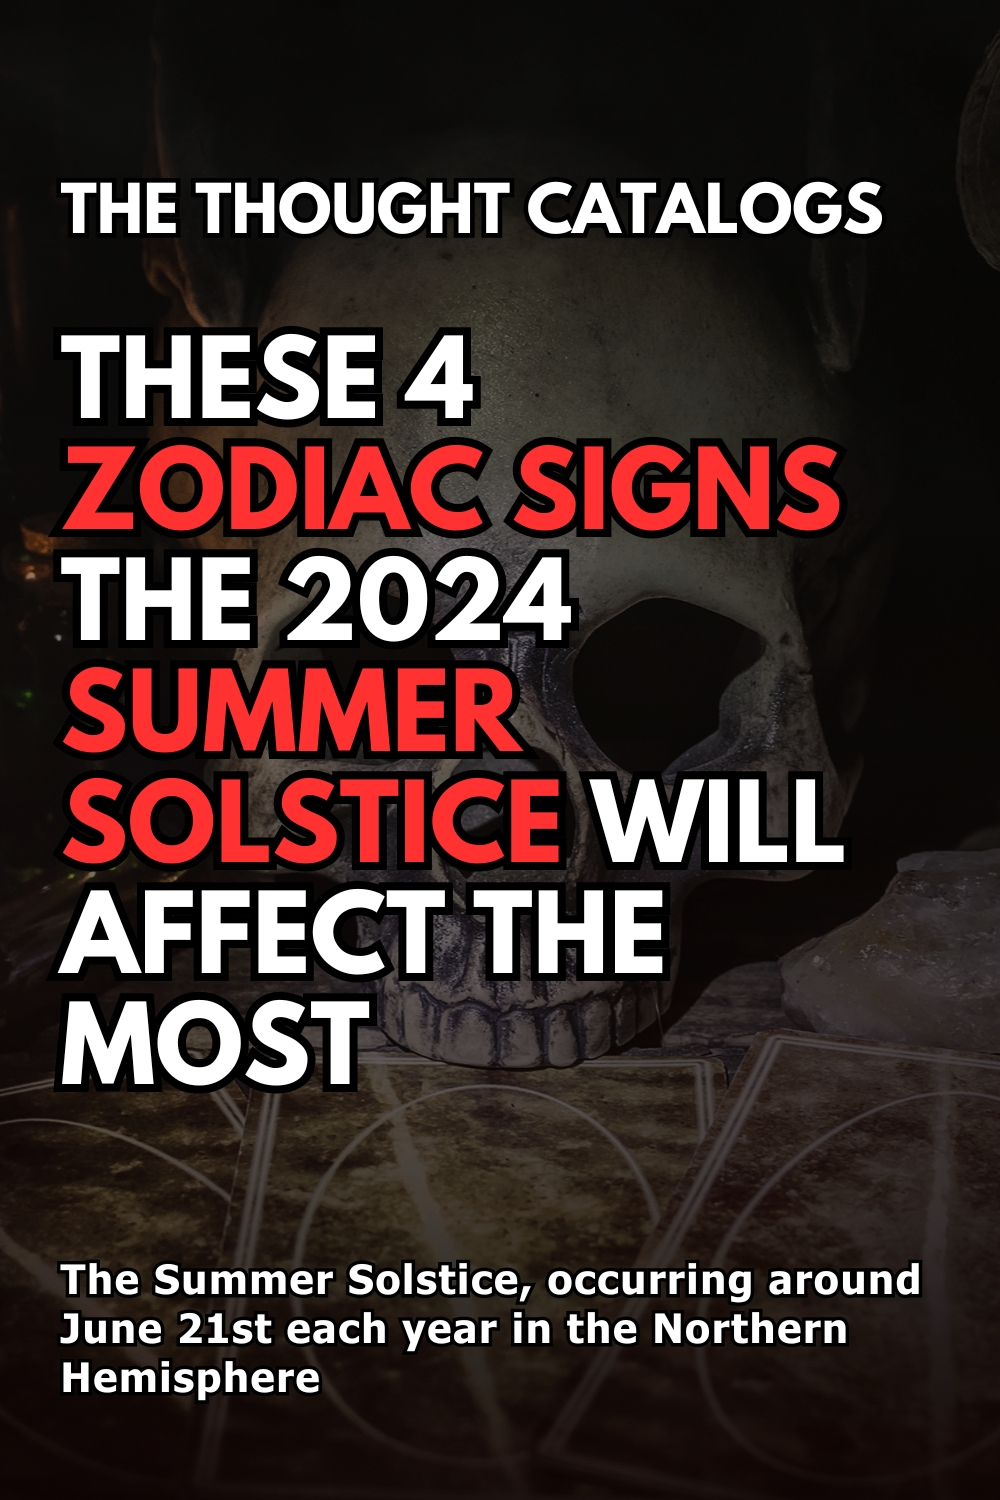 These 4 Zodiac Signs The 2024 Summer Solstice Will Affect The Most